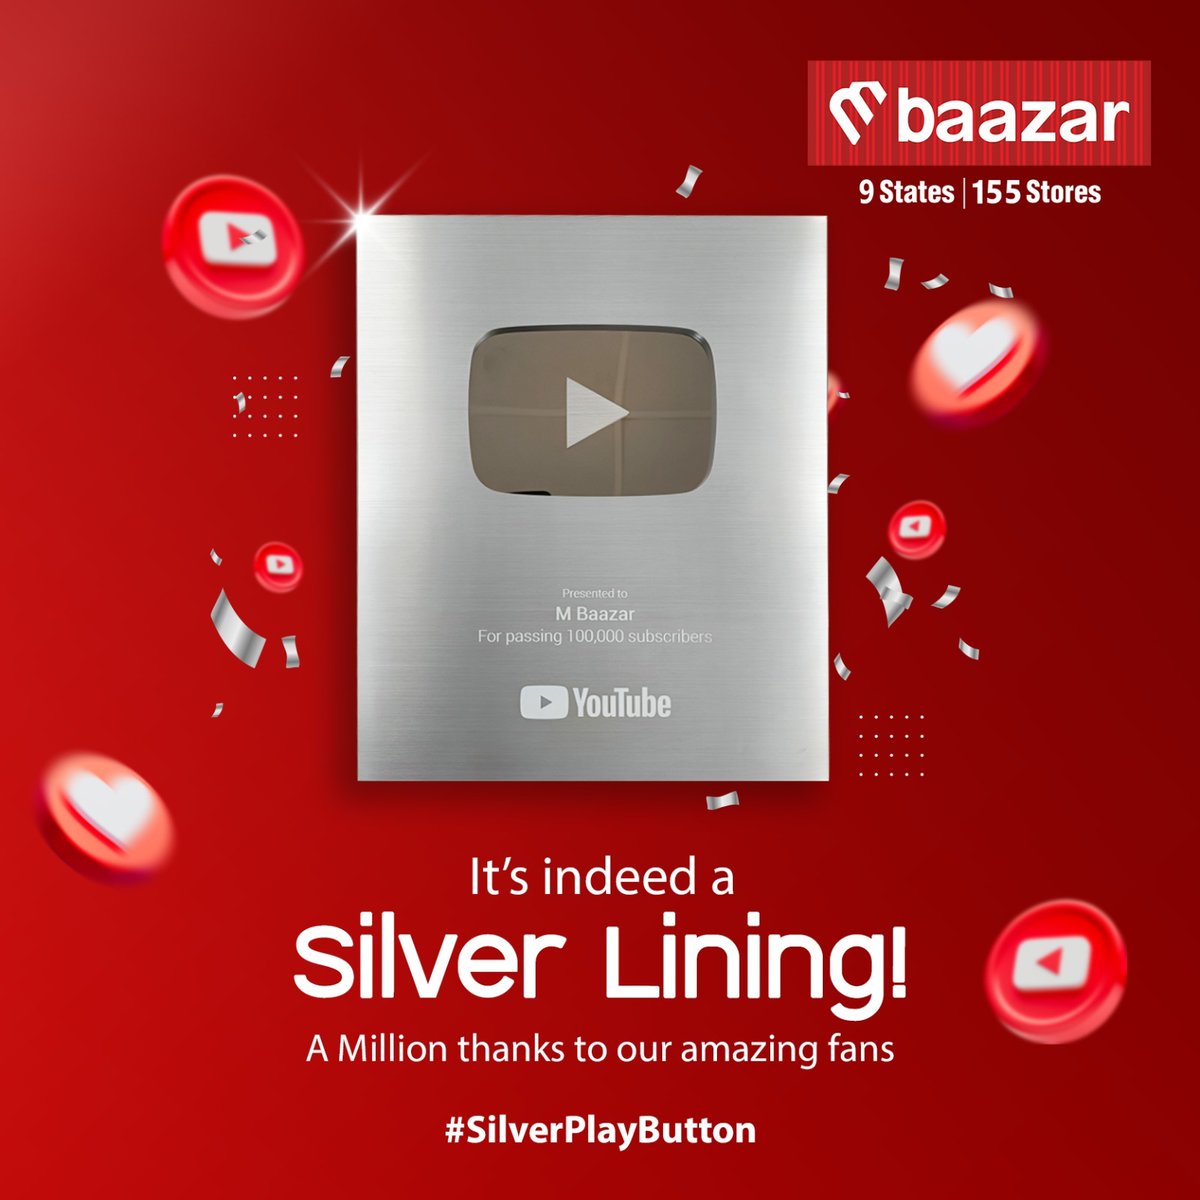 Thank you, dear fans, for your unwavering support on this incredible journey. Now the quest for the GOLD begins! #mbaazar #thefashionstore #shoppingatmbaazar #festivefashion #silverplaybutton #YouTube